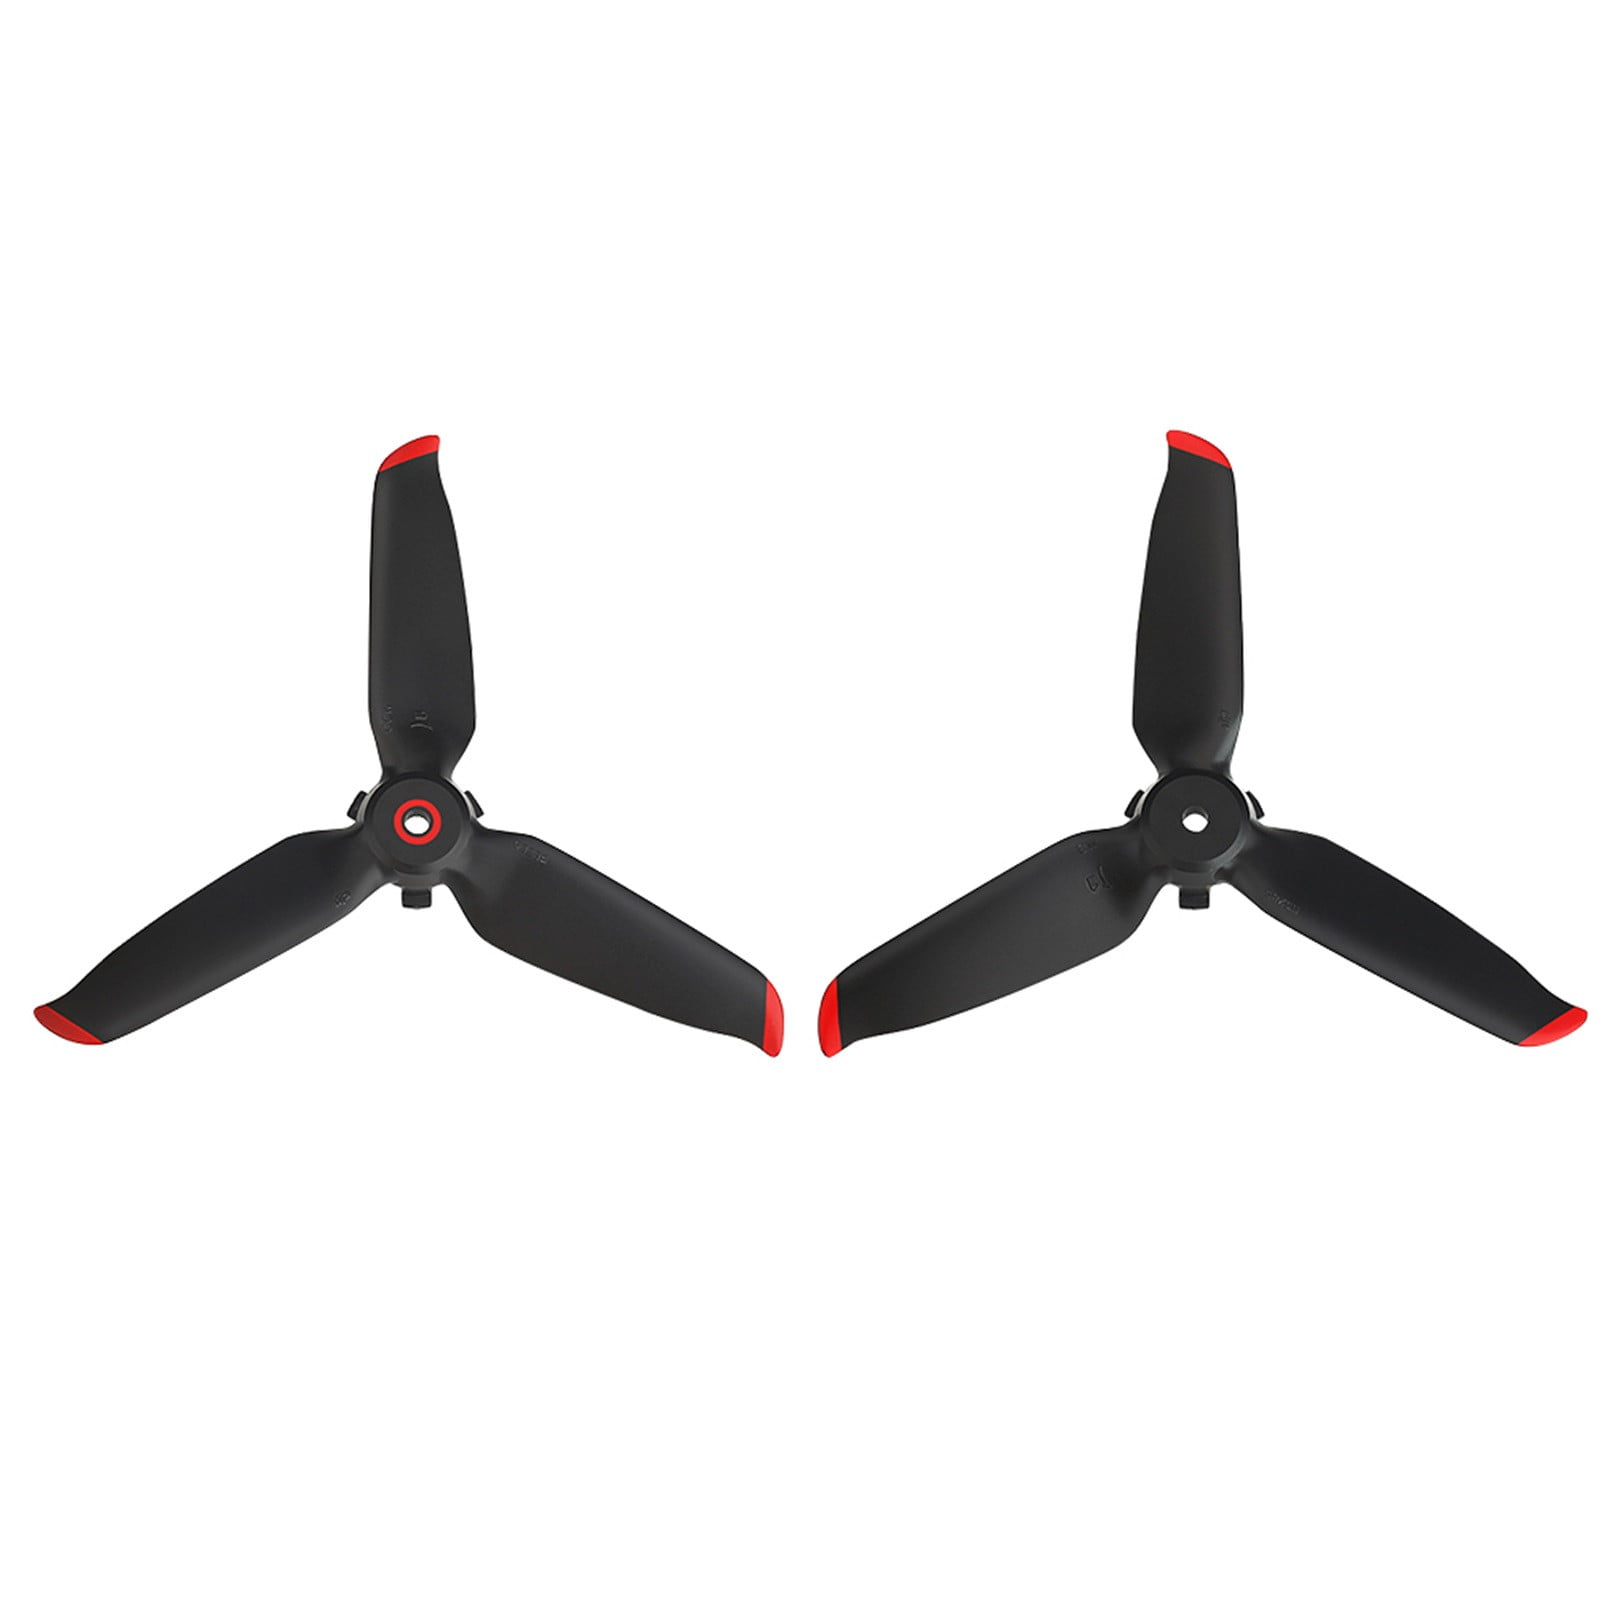 Upgraded Motors Main Propeller Cash Pack for Syma X11 X11C RC Quad Copter Quadrotor Drone Replacement Spare Parts CCW and CW with Gears Toy 4 Pcs White-Black 